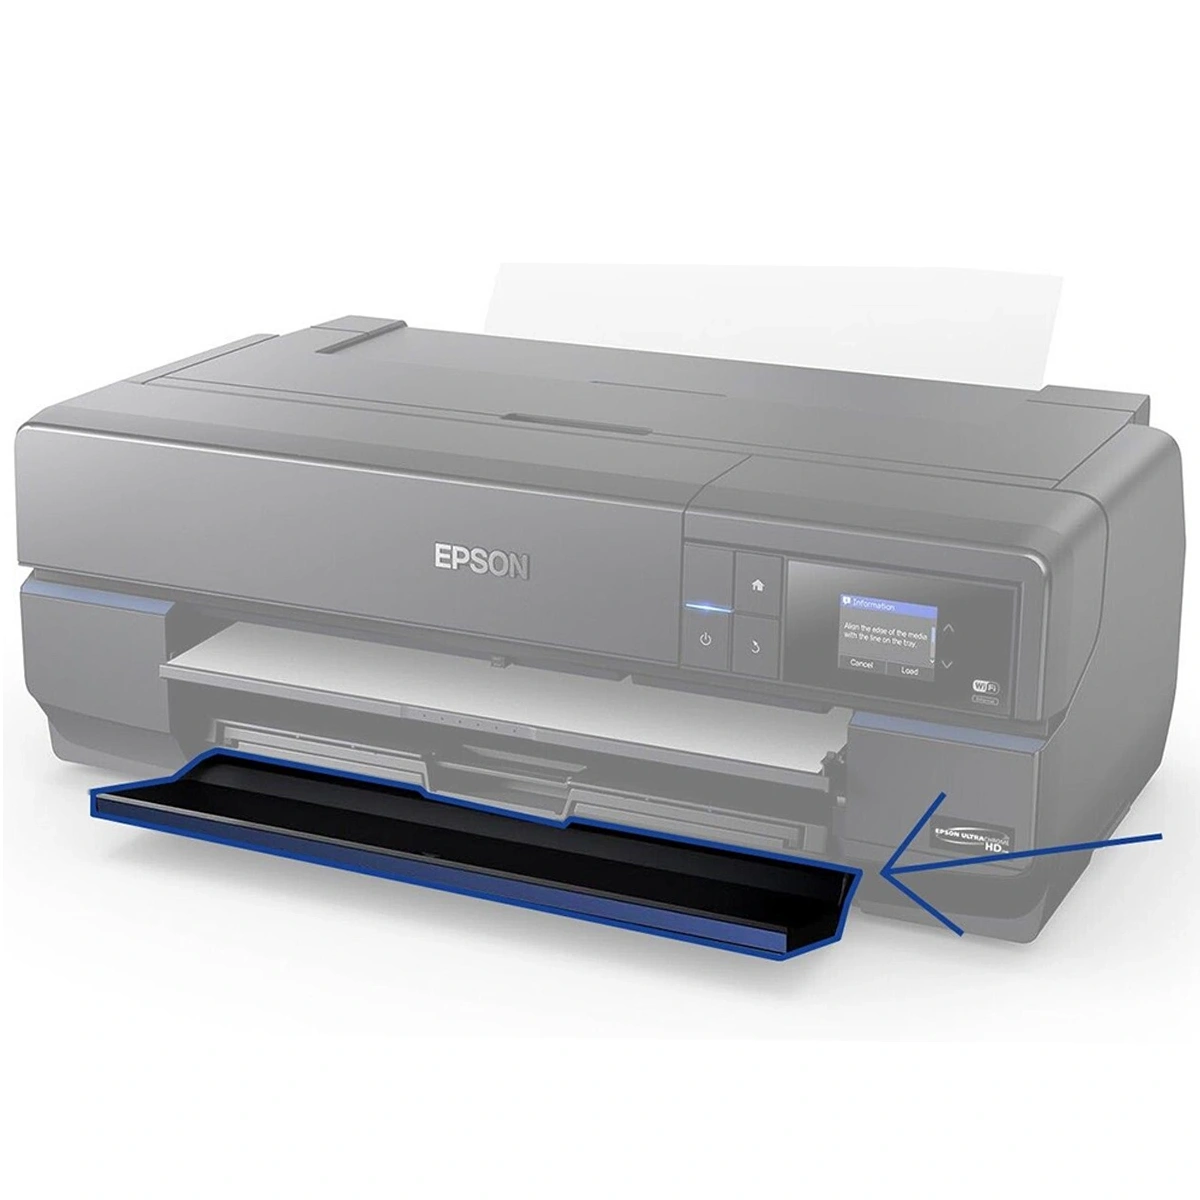 Epson SureColor P800 Printer With Front Paper Panel Highlighted